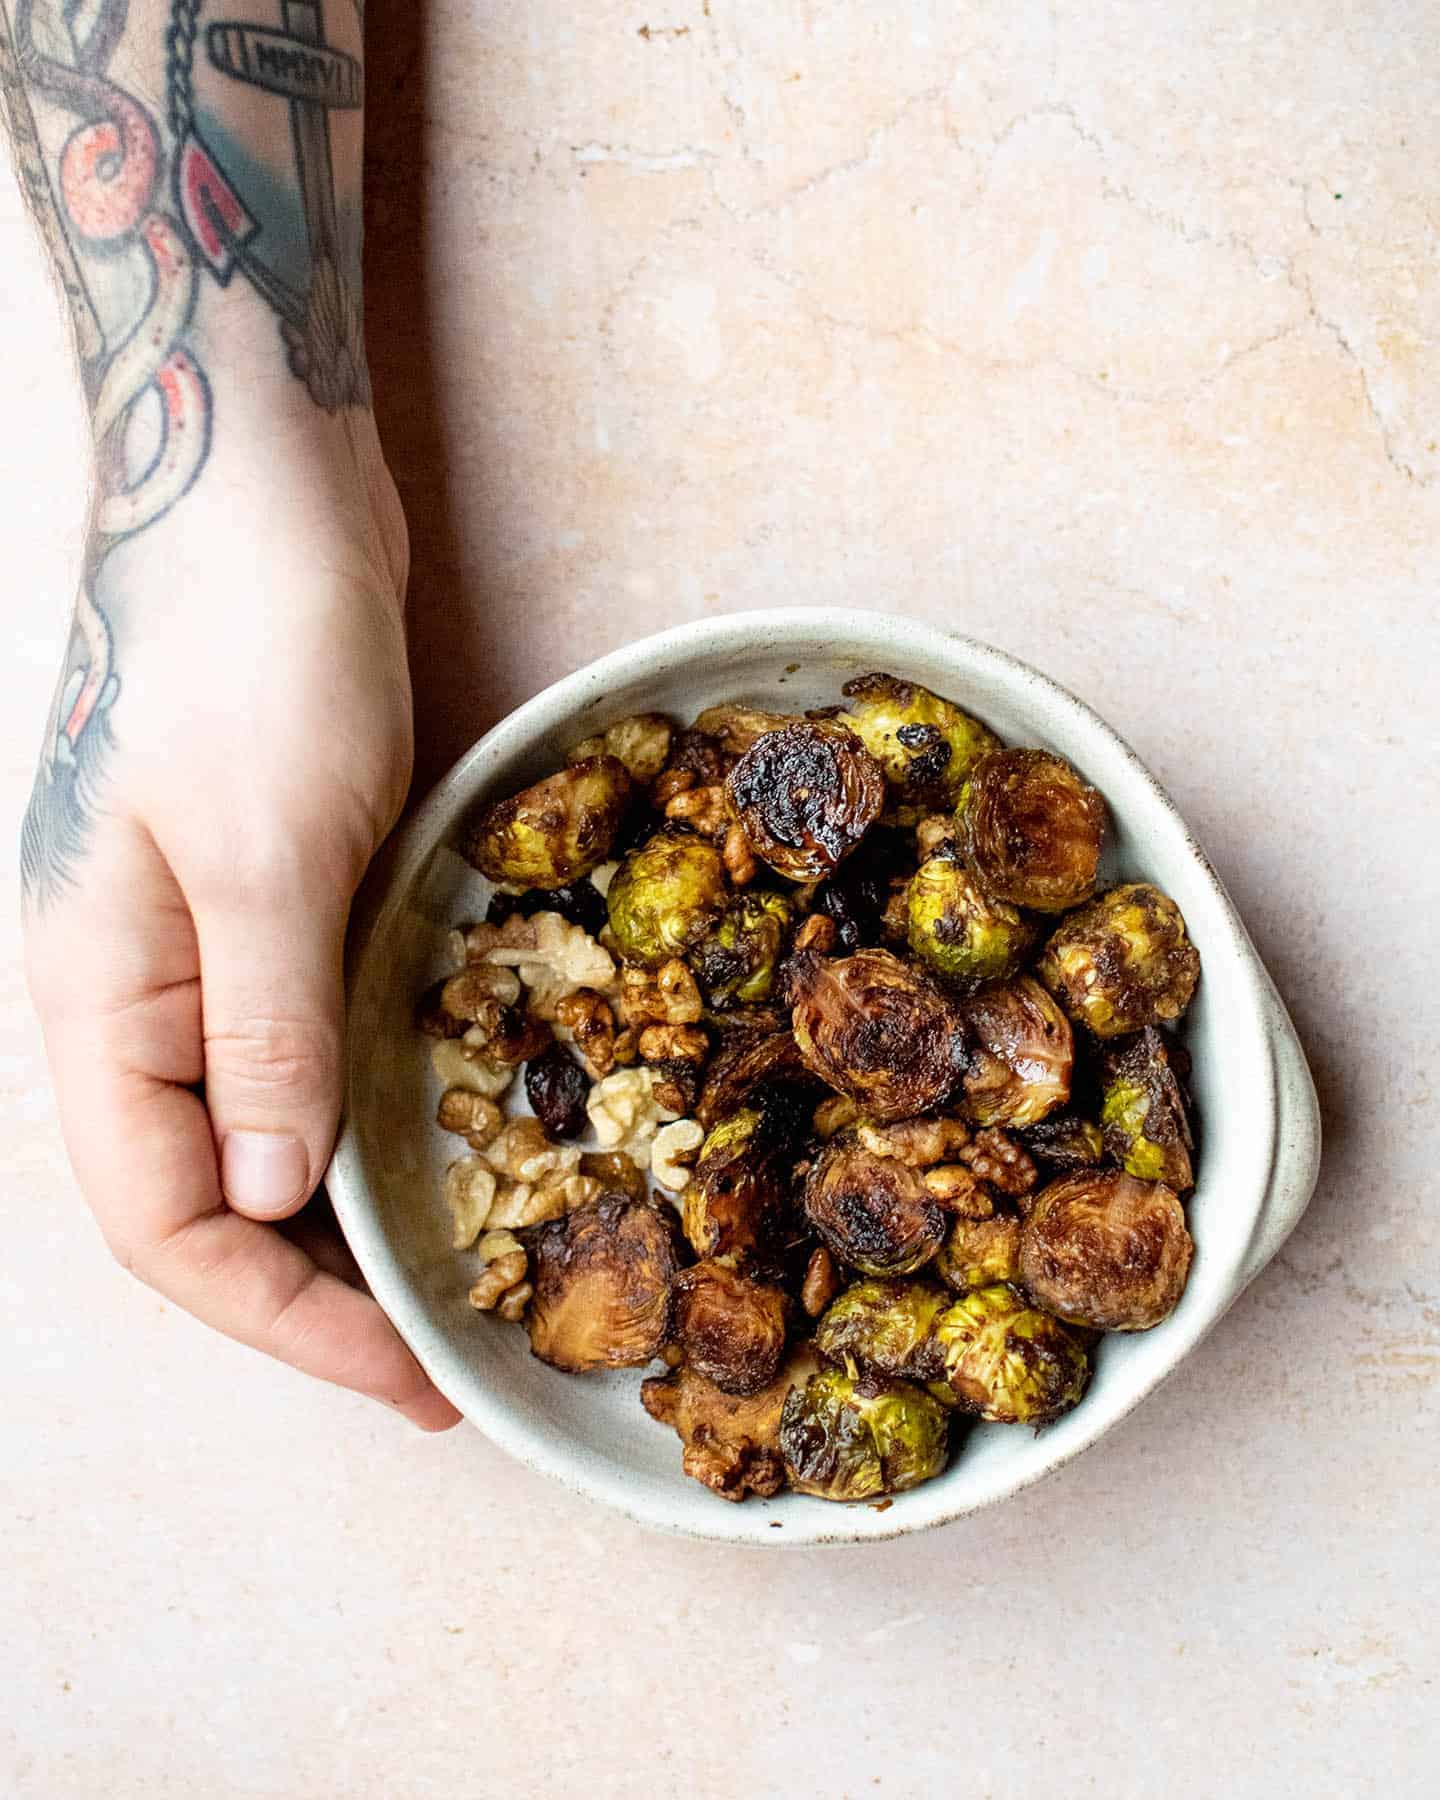 A white bowl containing browned, roasted sprouts.